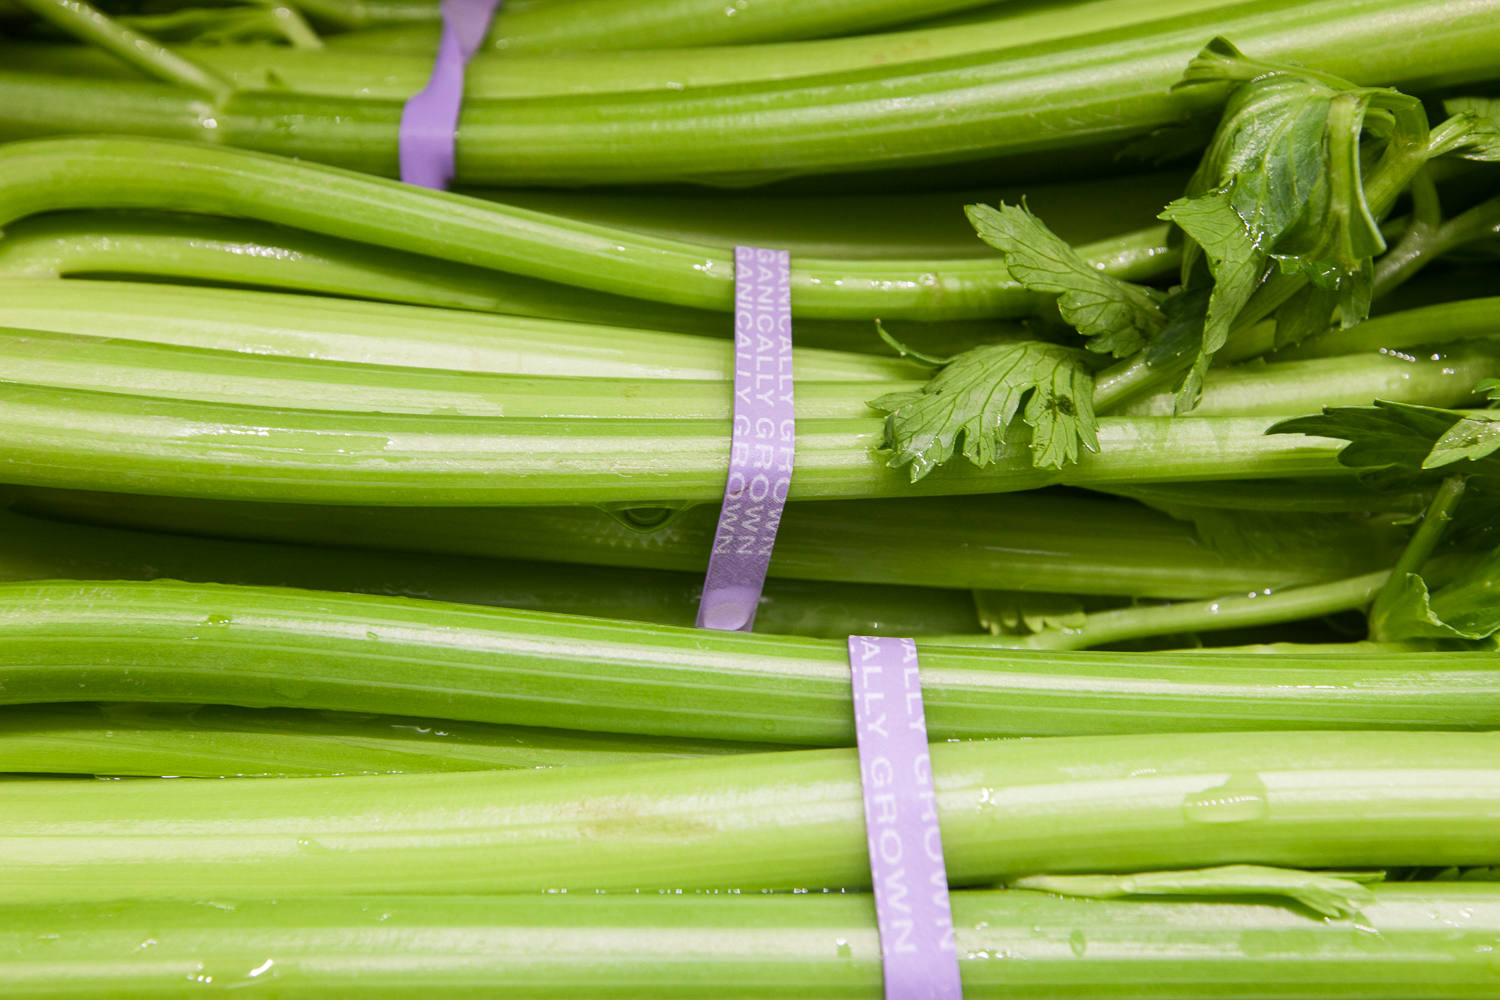 Organic Celery from Mana Foods Produce Department